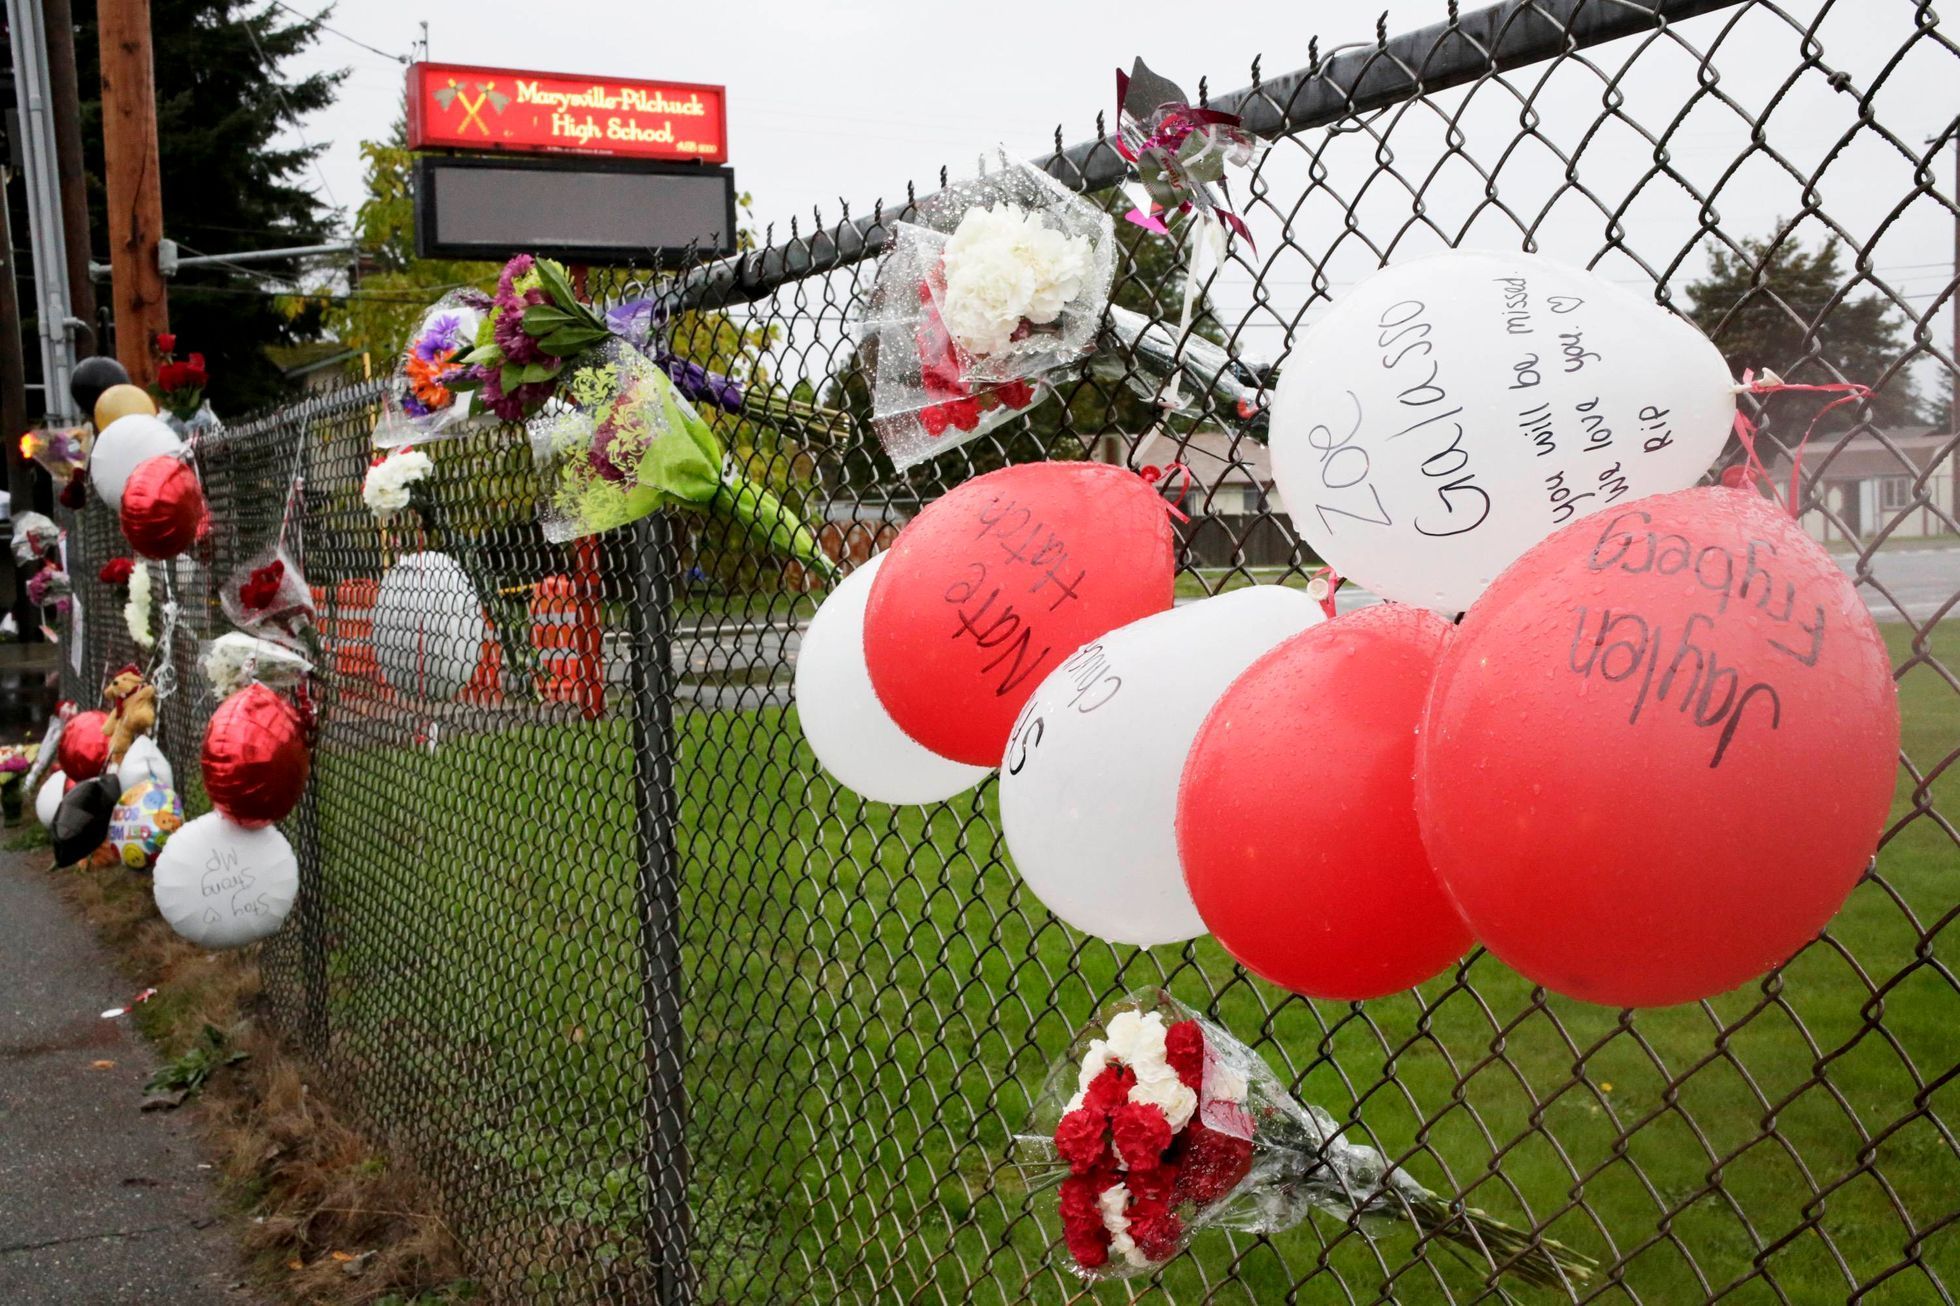 A makeshift memorial is seen outside Marysville-Pilchuck High School the day after a school shooting in Marysville